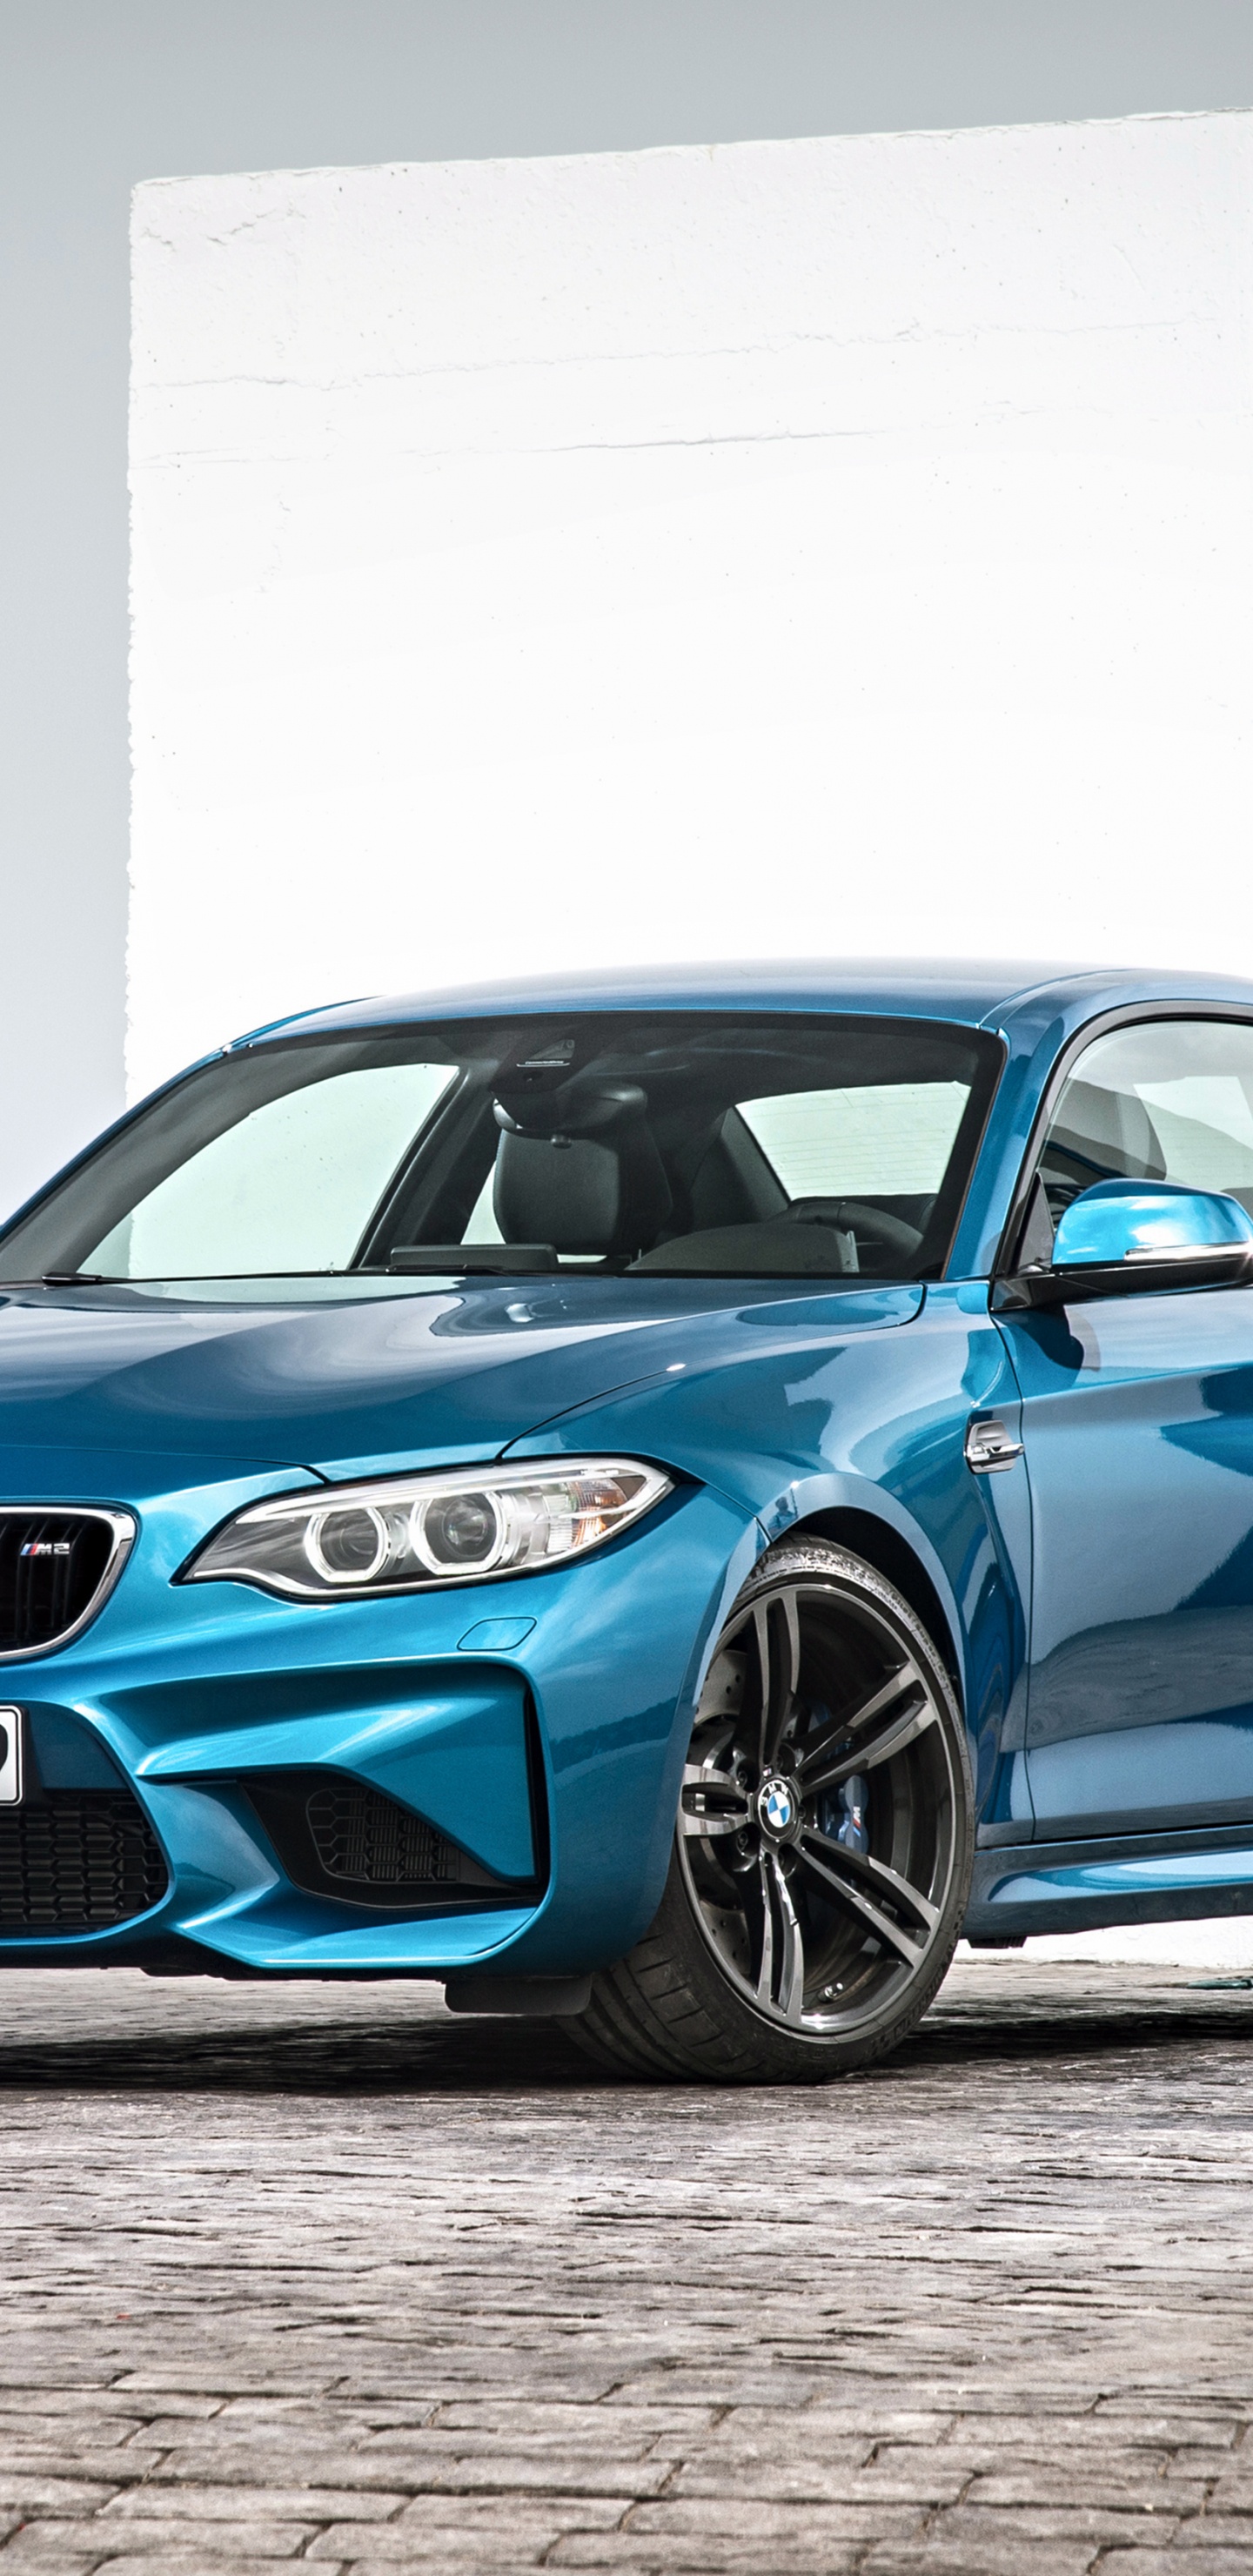 Blau Bmw m3 Coupe. Wallpaper in 1440x2960 Resolution